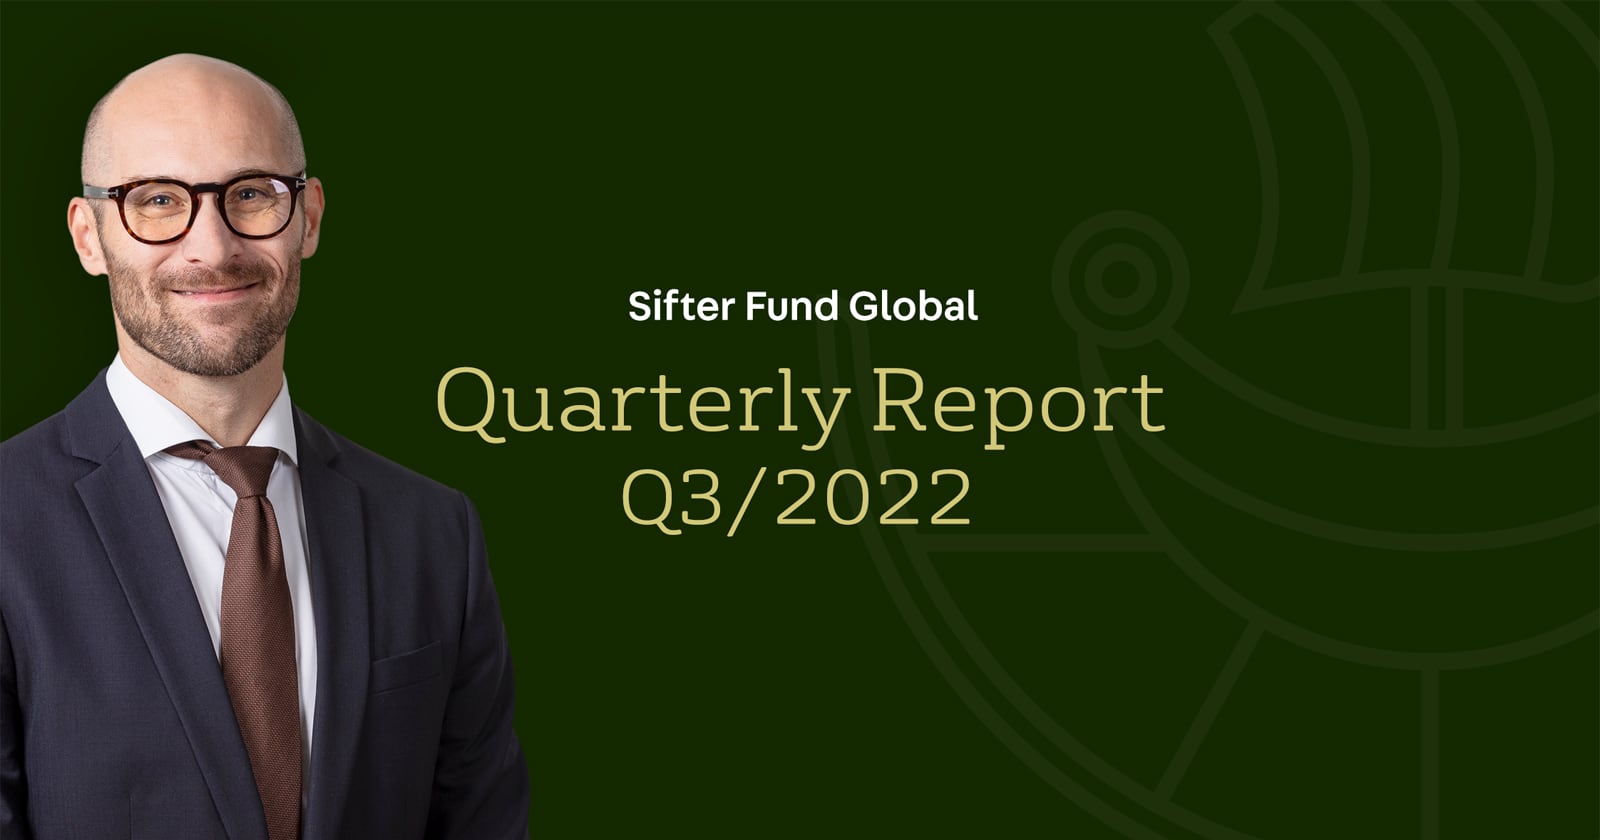 Sifter Fund Quarterly Report Q3/2022